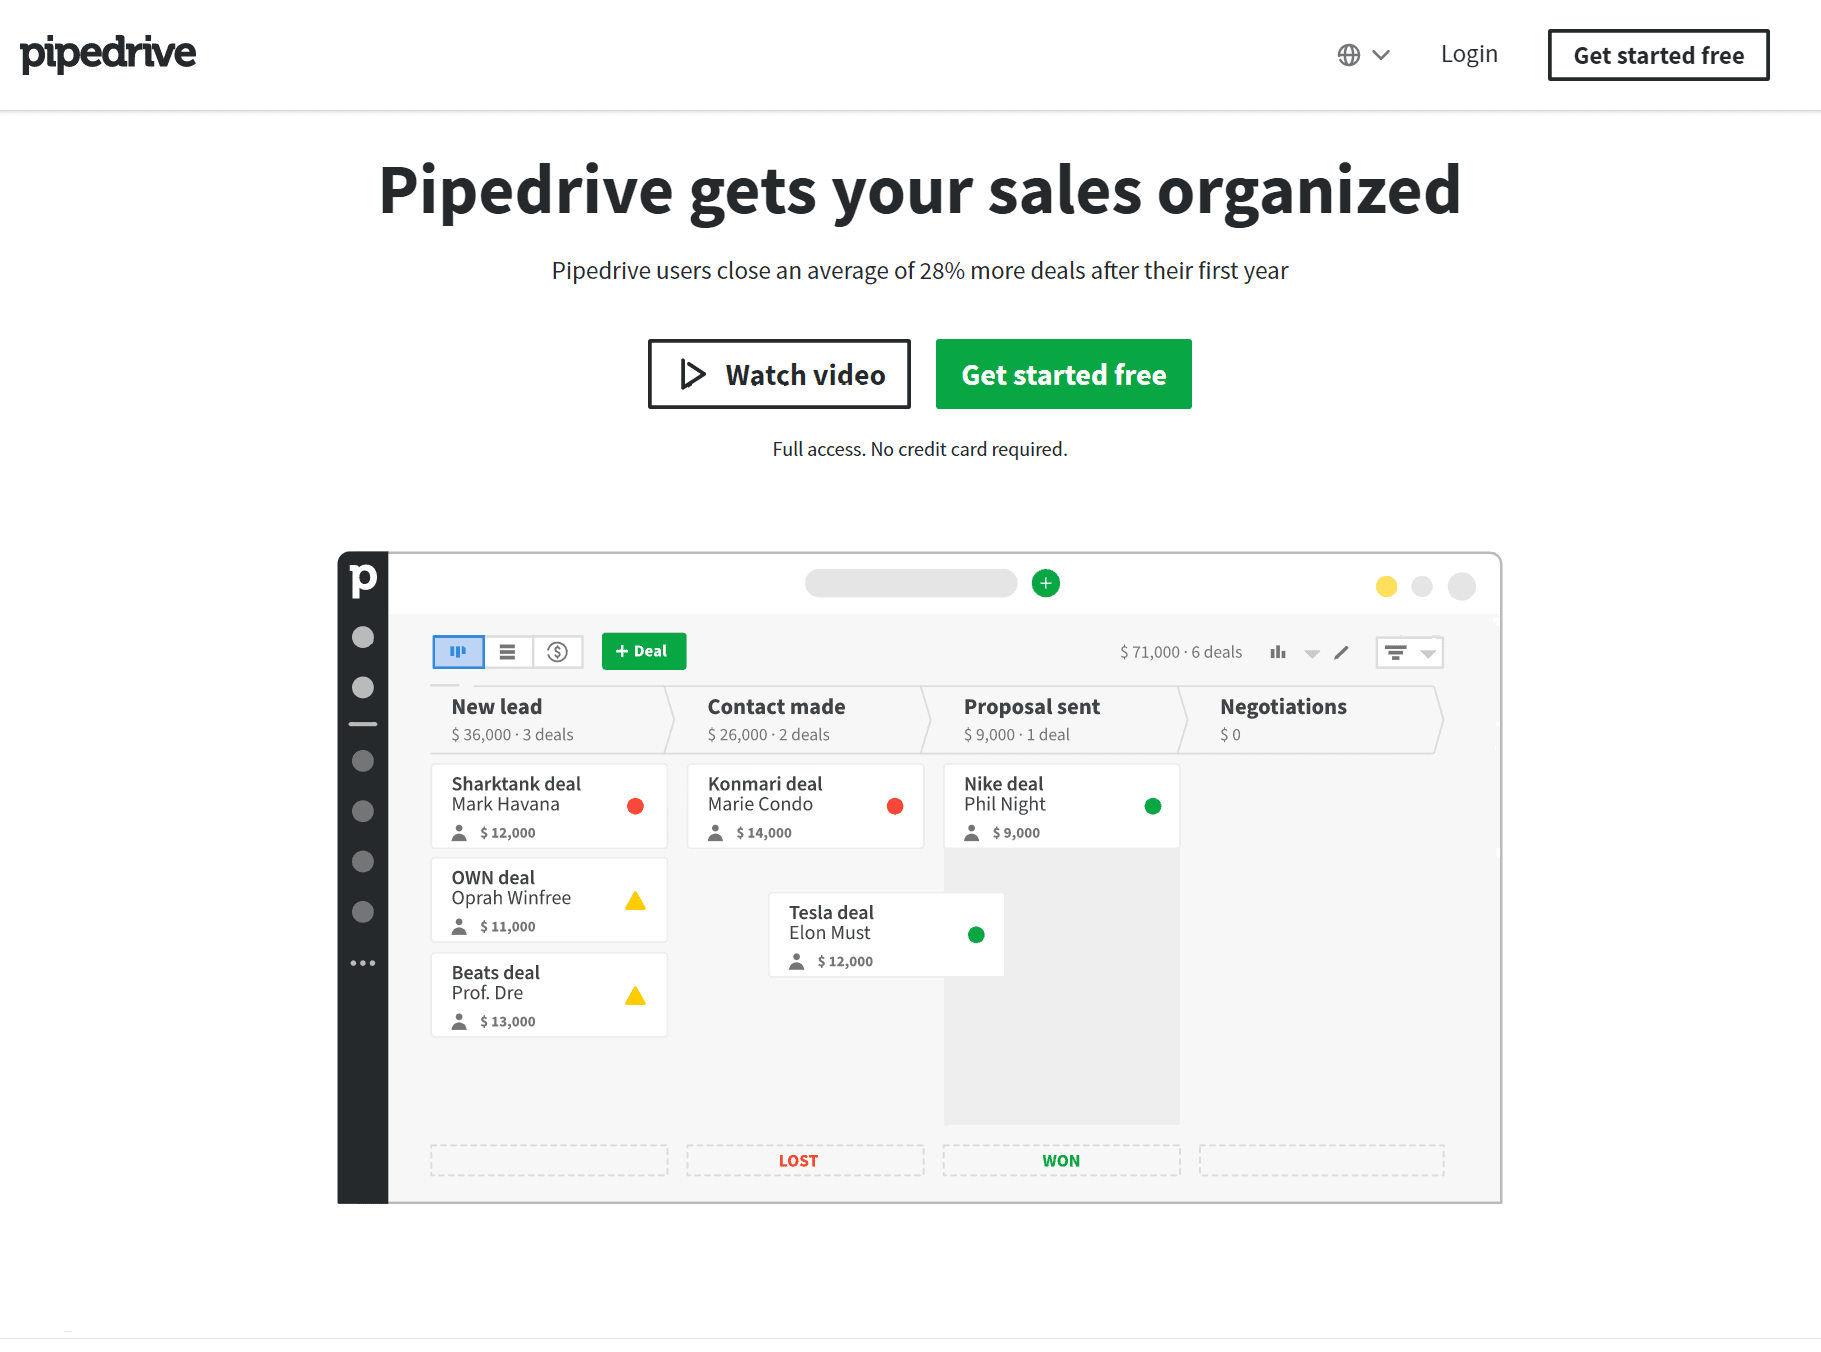 Pipedrive 概述：HubSpot 与 Pipedrive